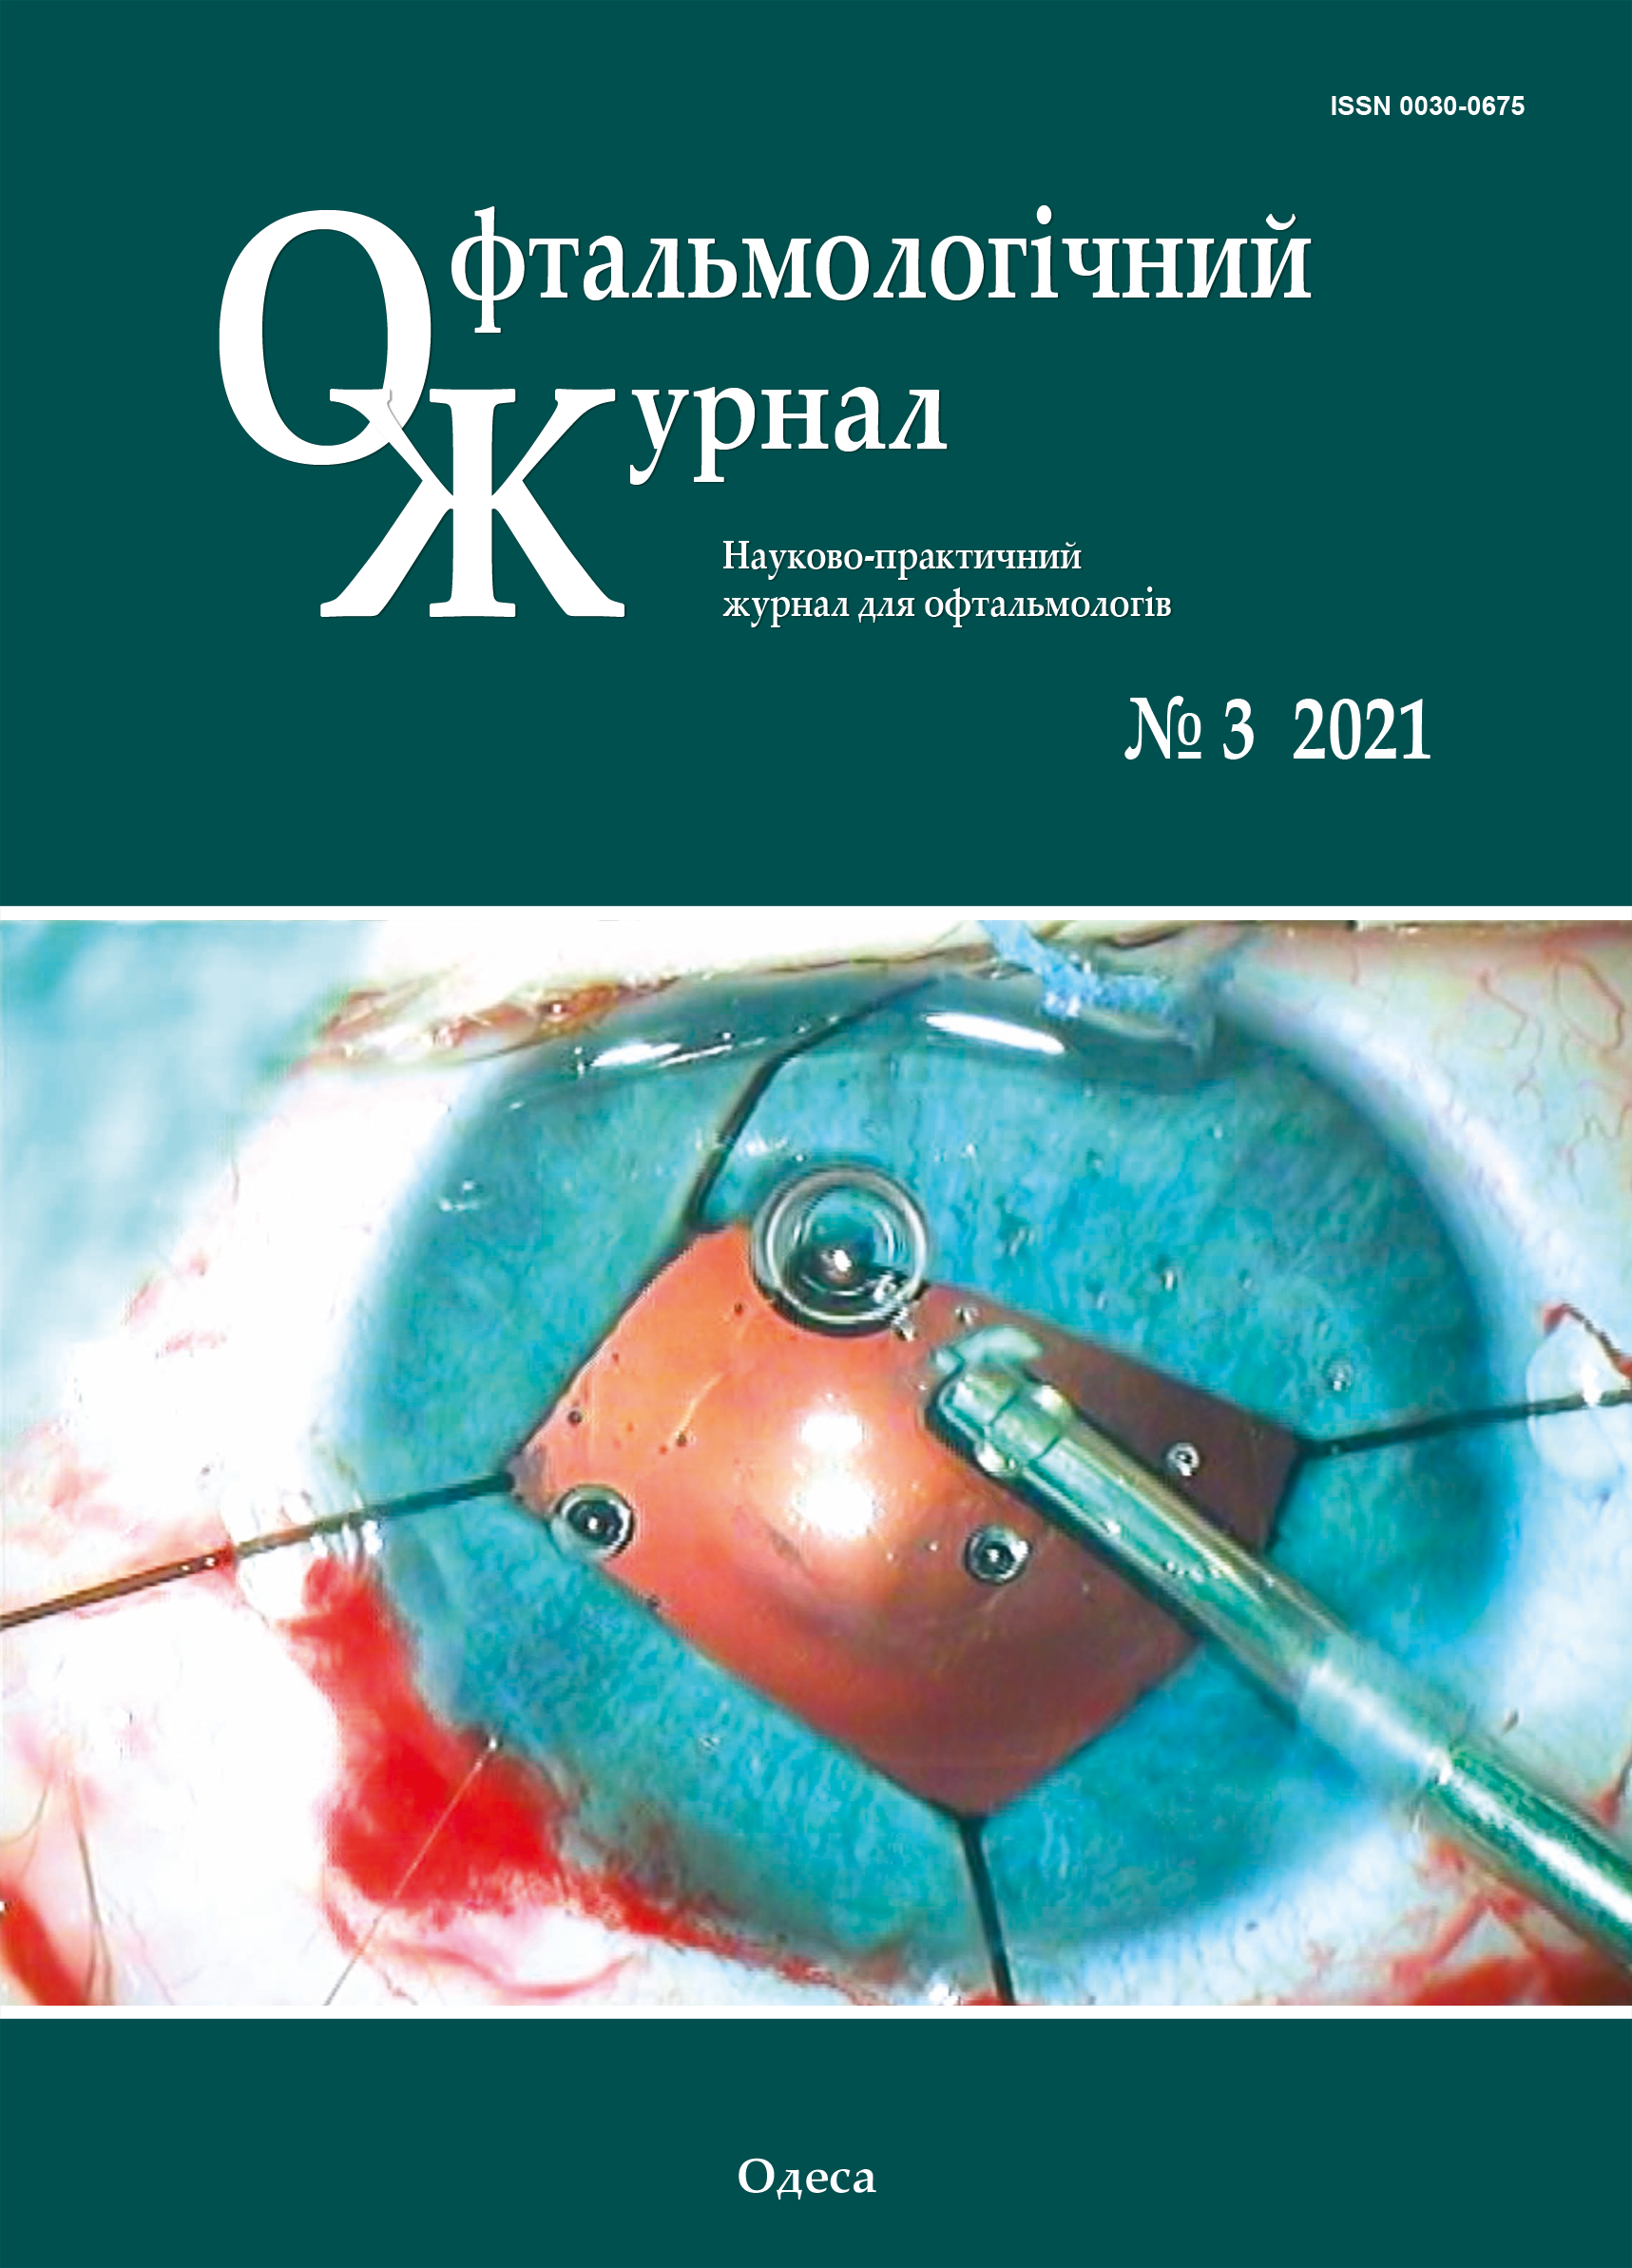 					View Vol. 500 No. 3 (2021): Journal of Ophthalmology (Ukraine)
				